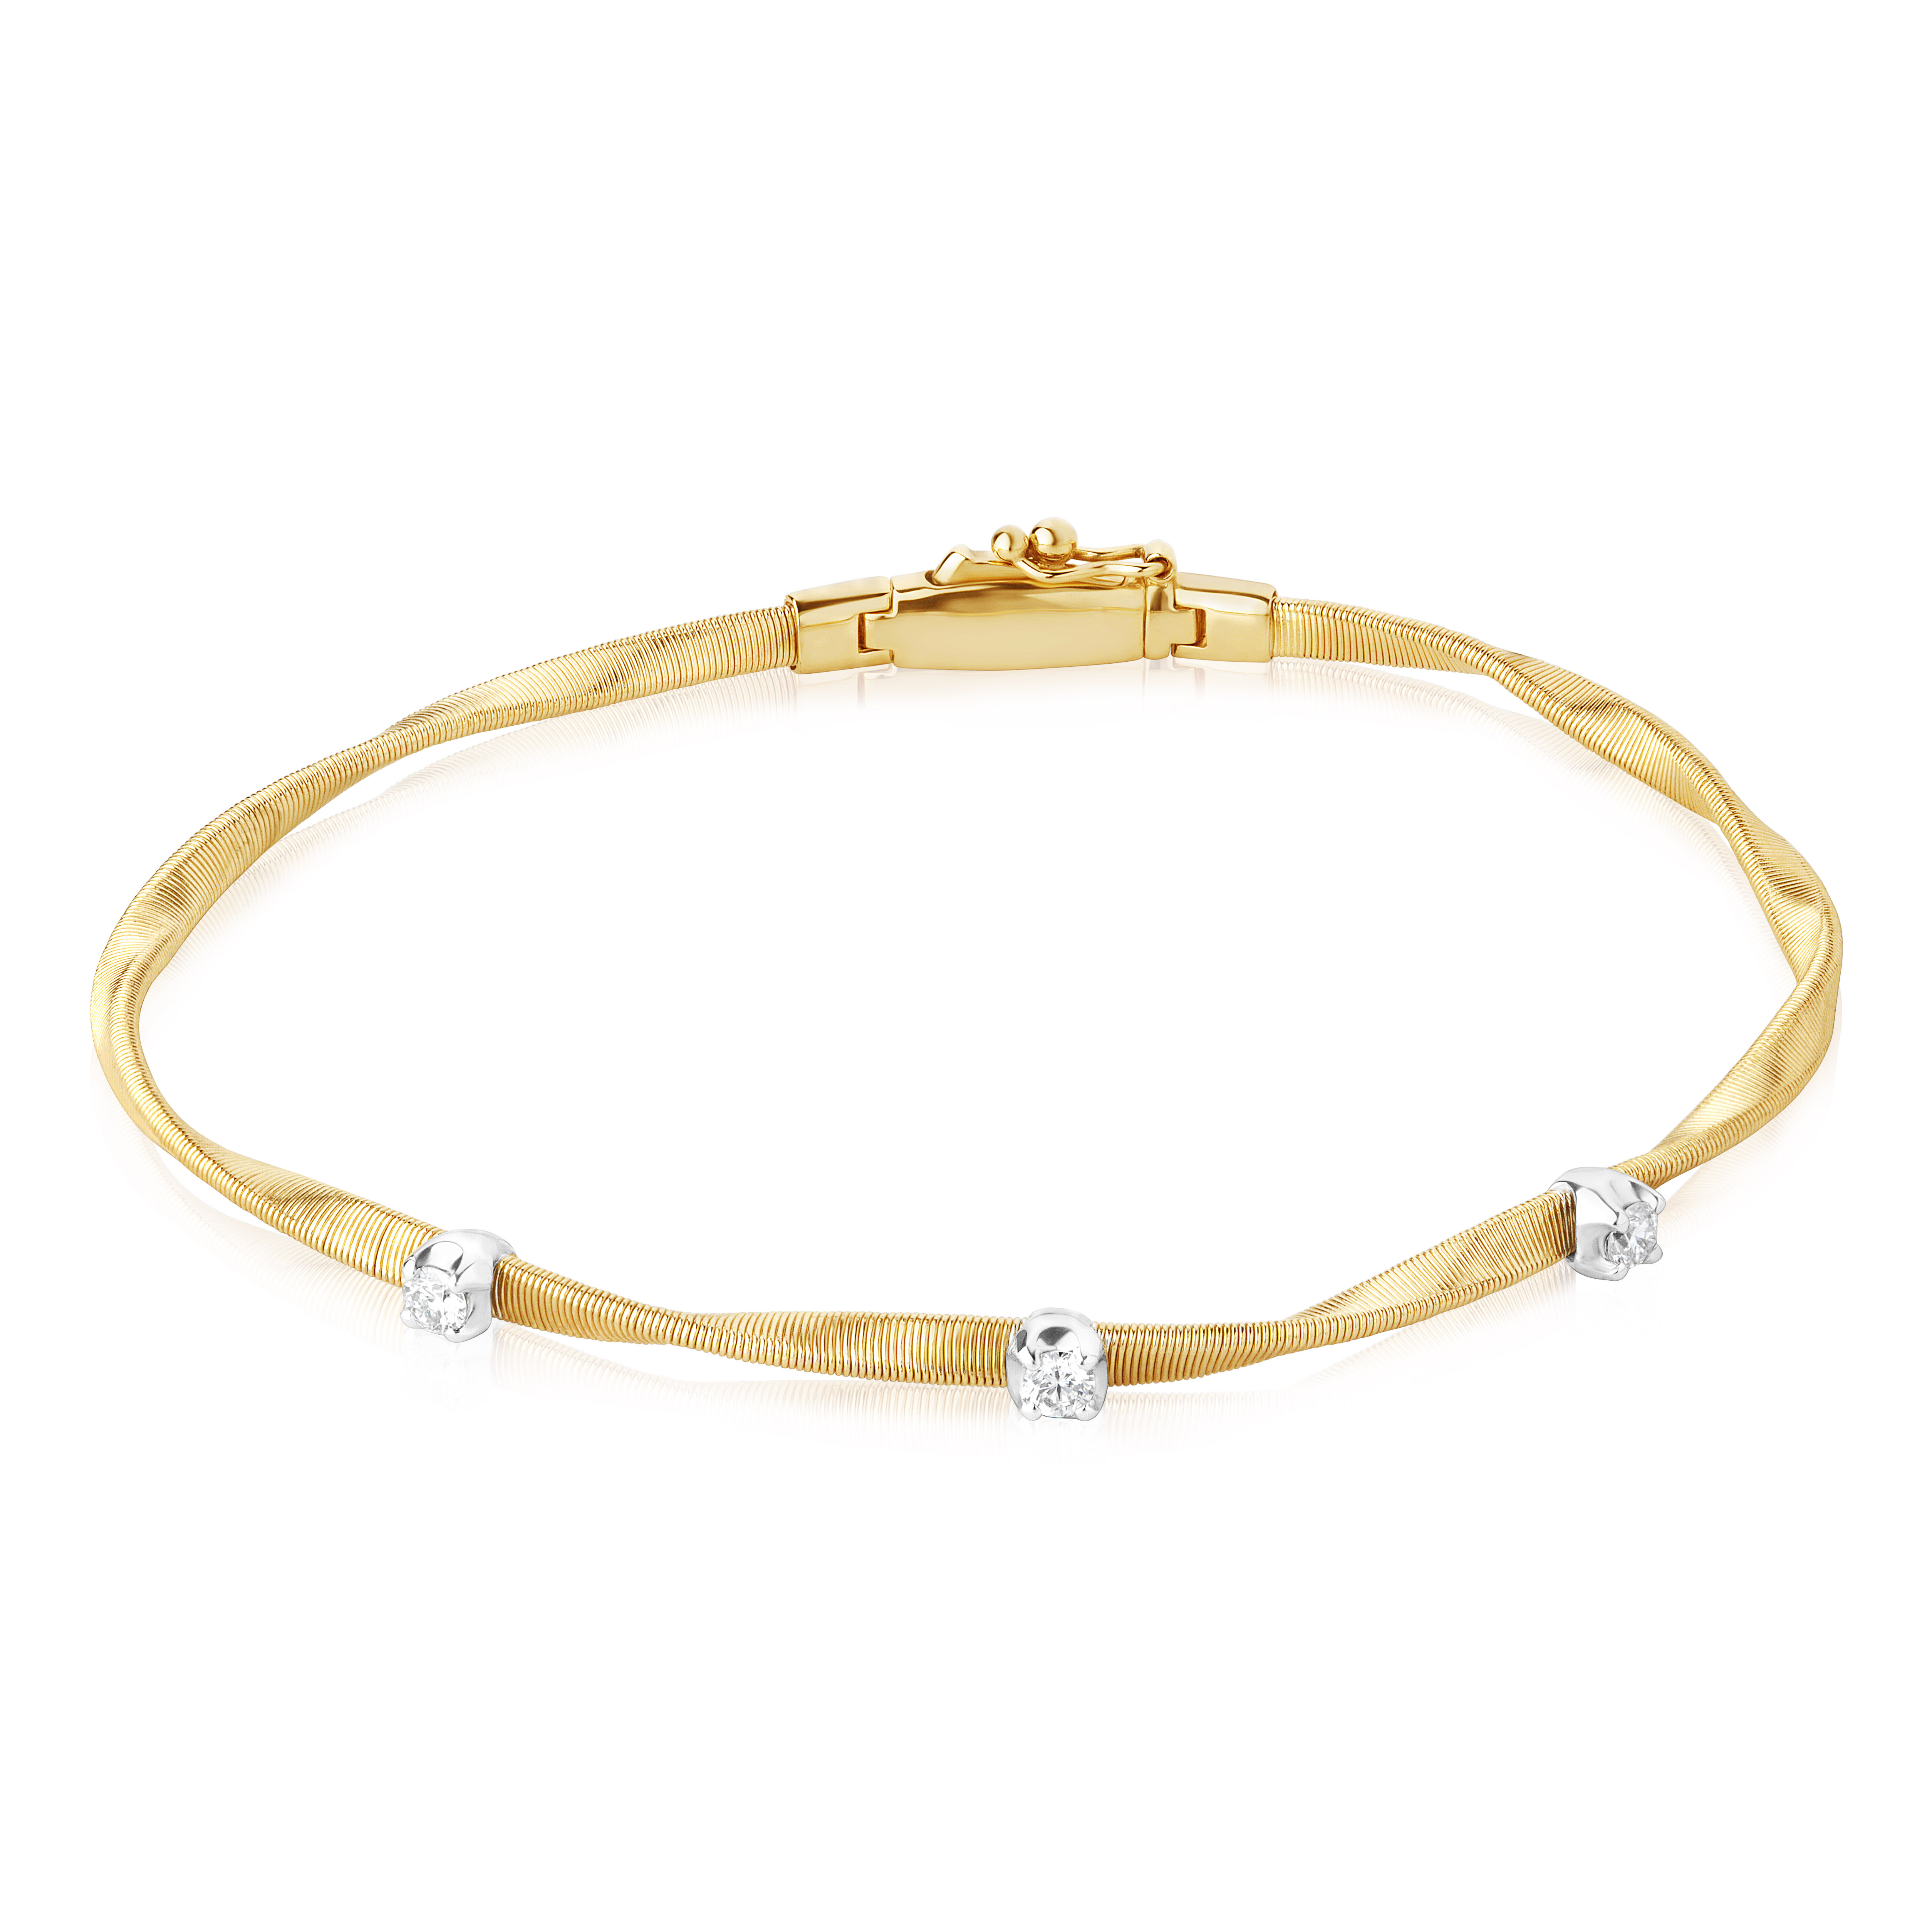 Marco Bicego 18K Yellow Gold and White Gold Marrakech Bracelet